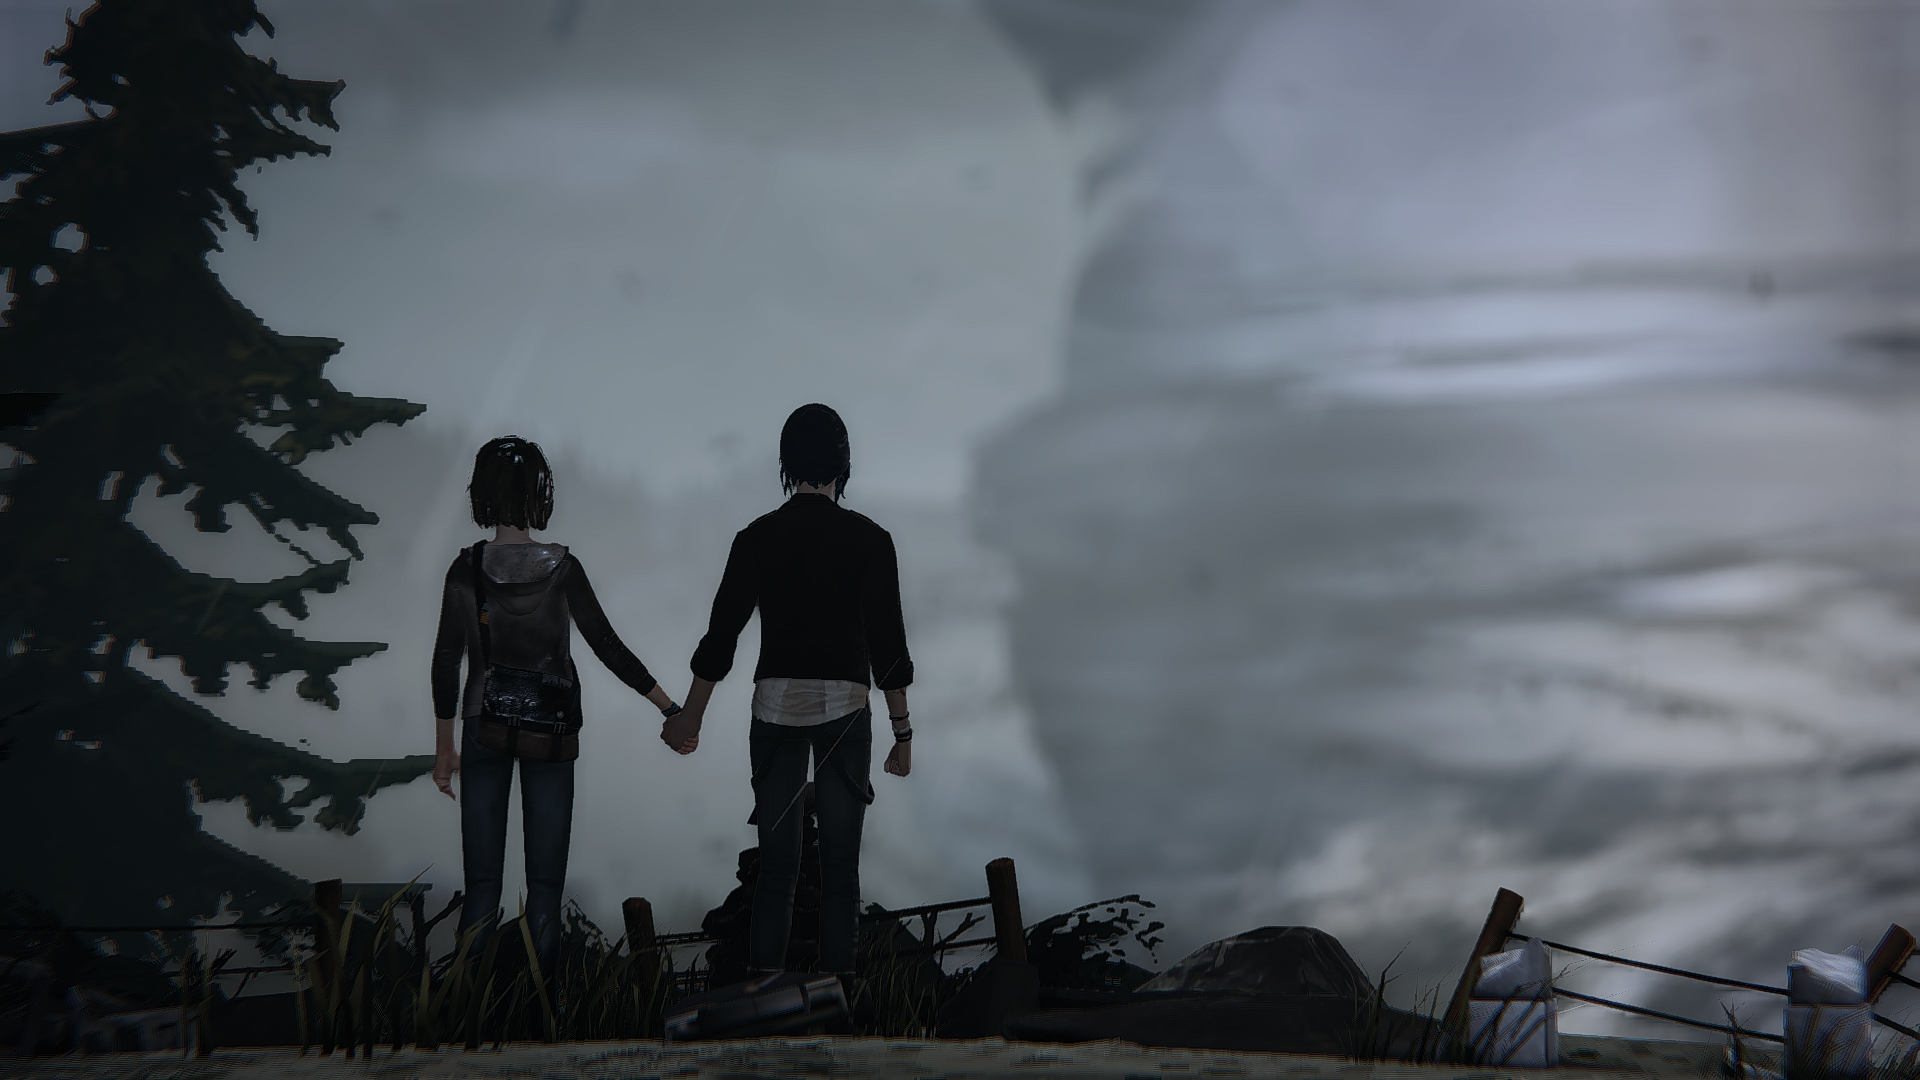 General 1920x1080 Life Is Strange Max Caulfield Chloe Price holding hands two women video games PC gaming screen shot